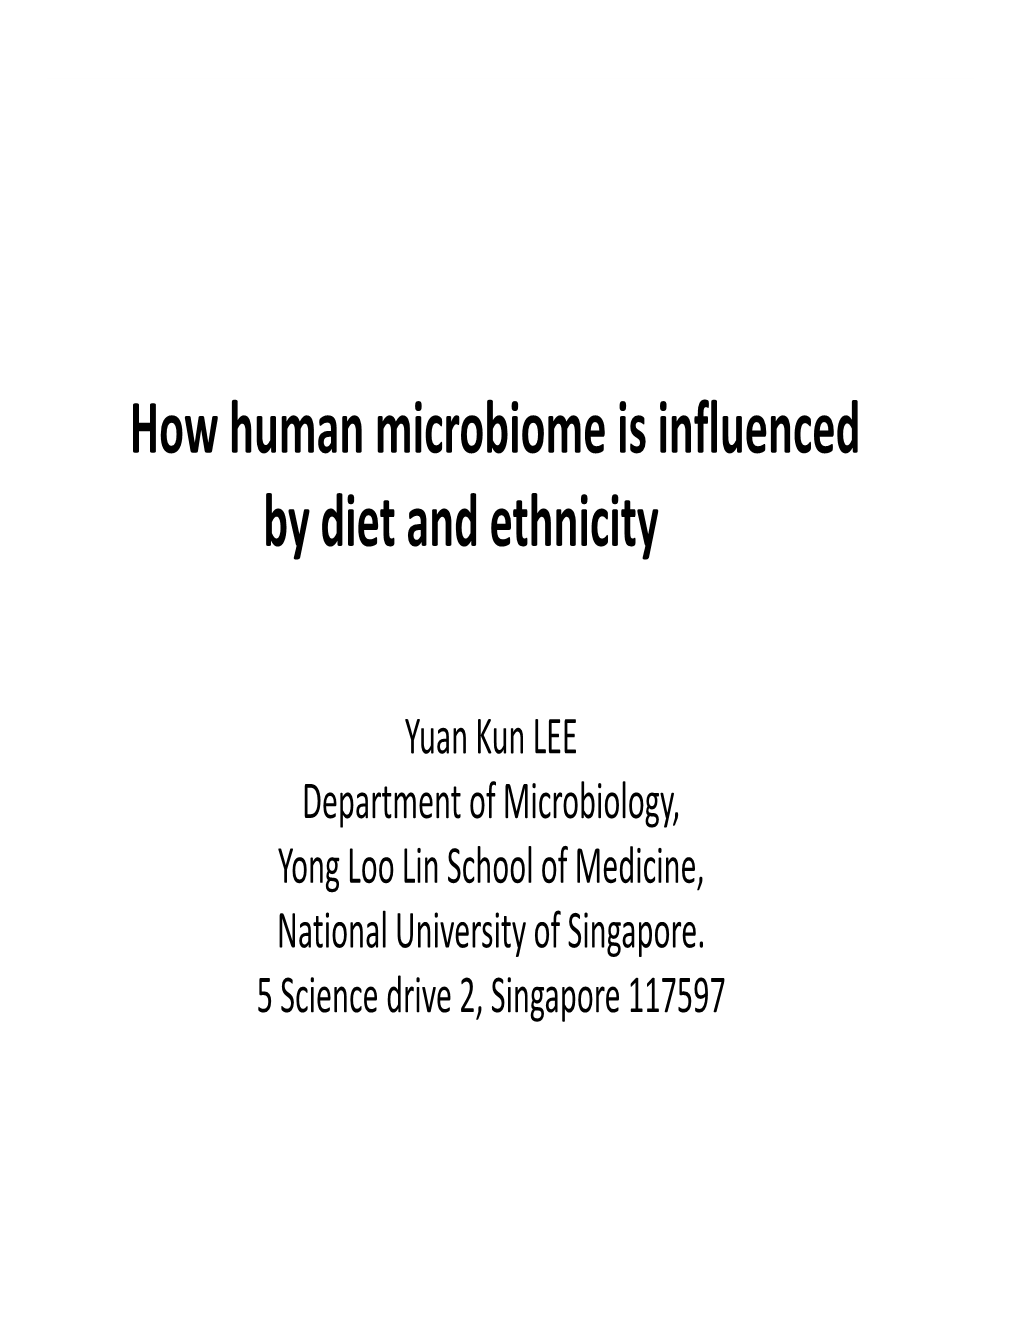 How Human Microbiome Is Influenced by Diet and Ethnicity